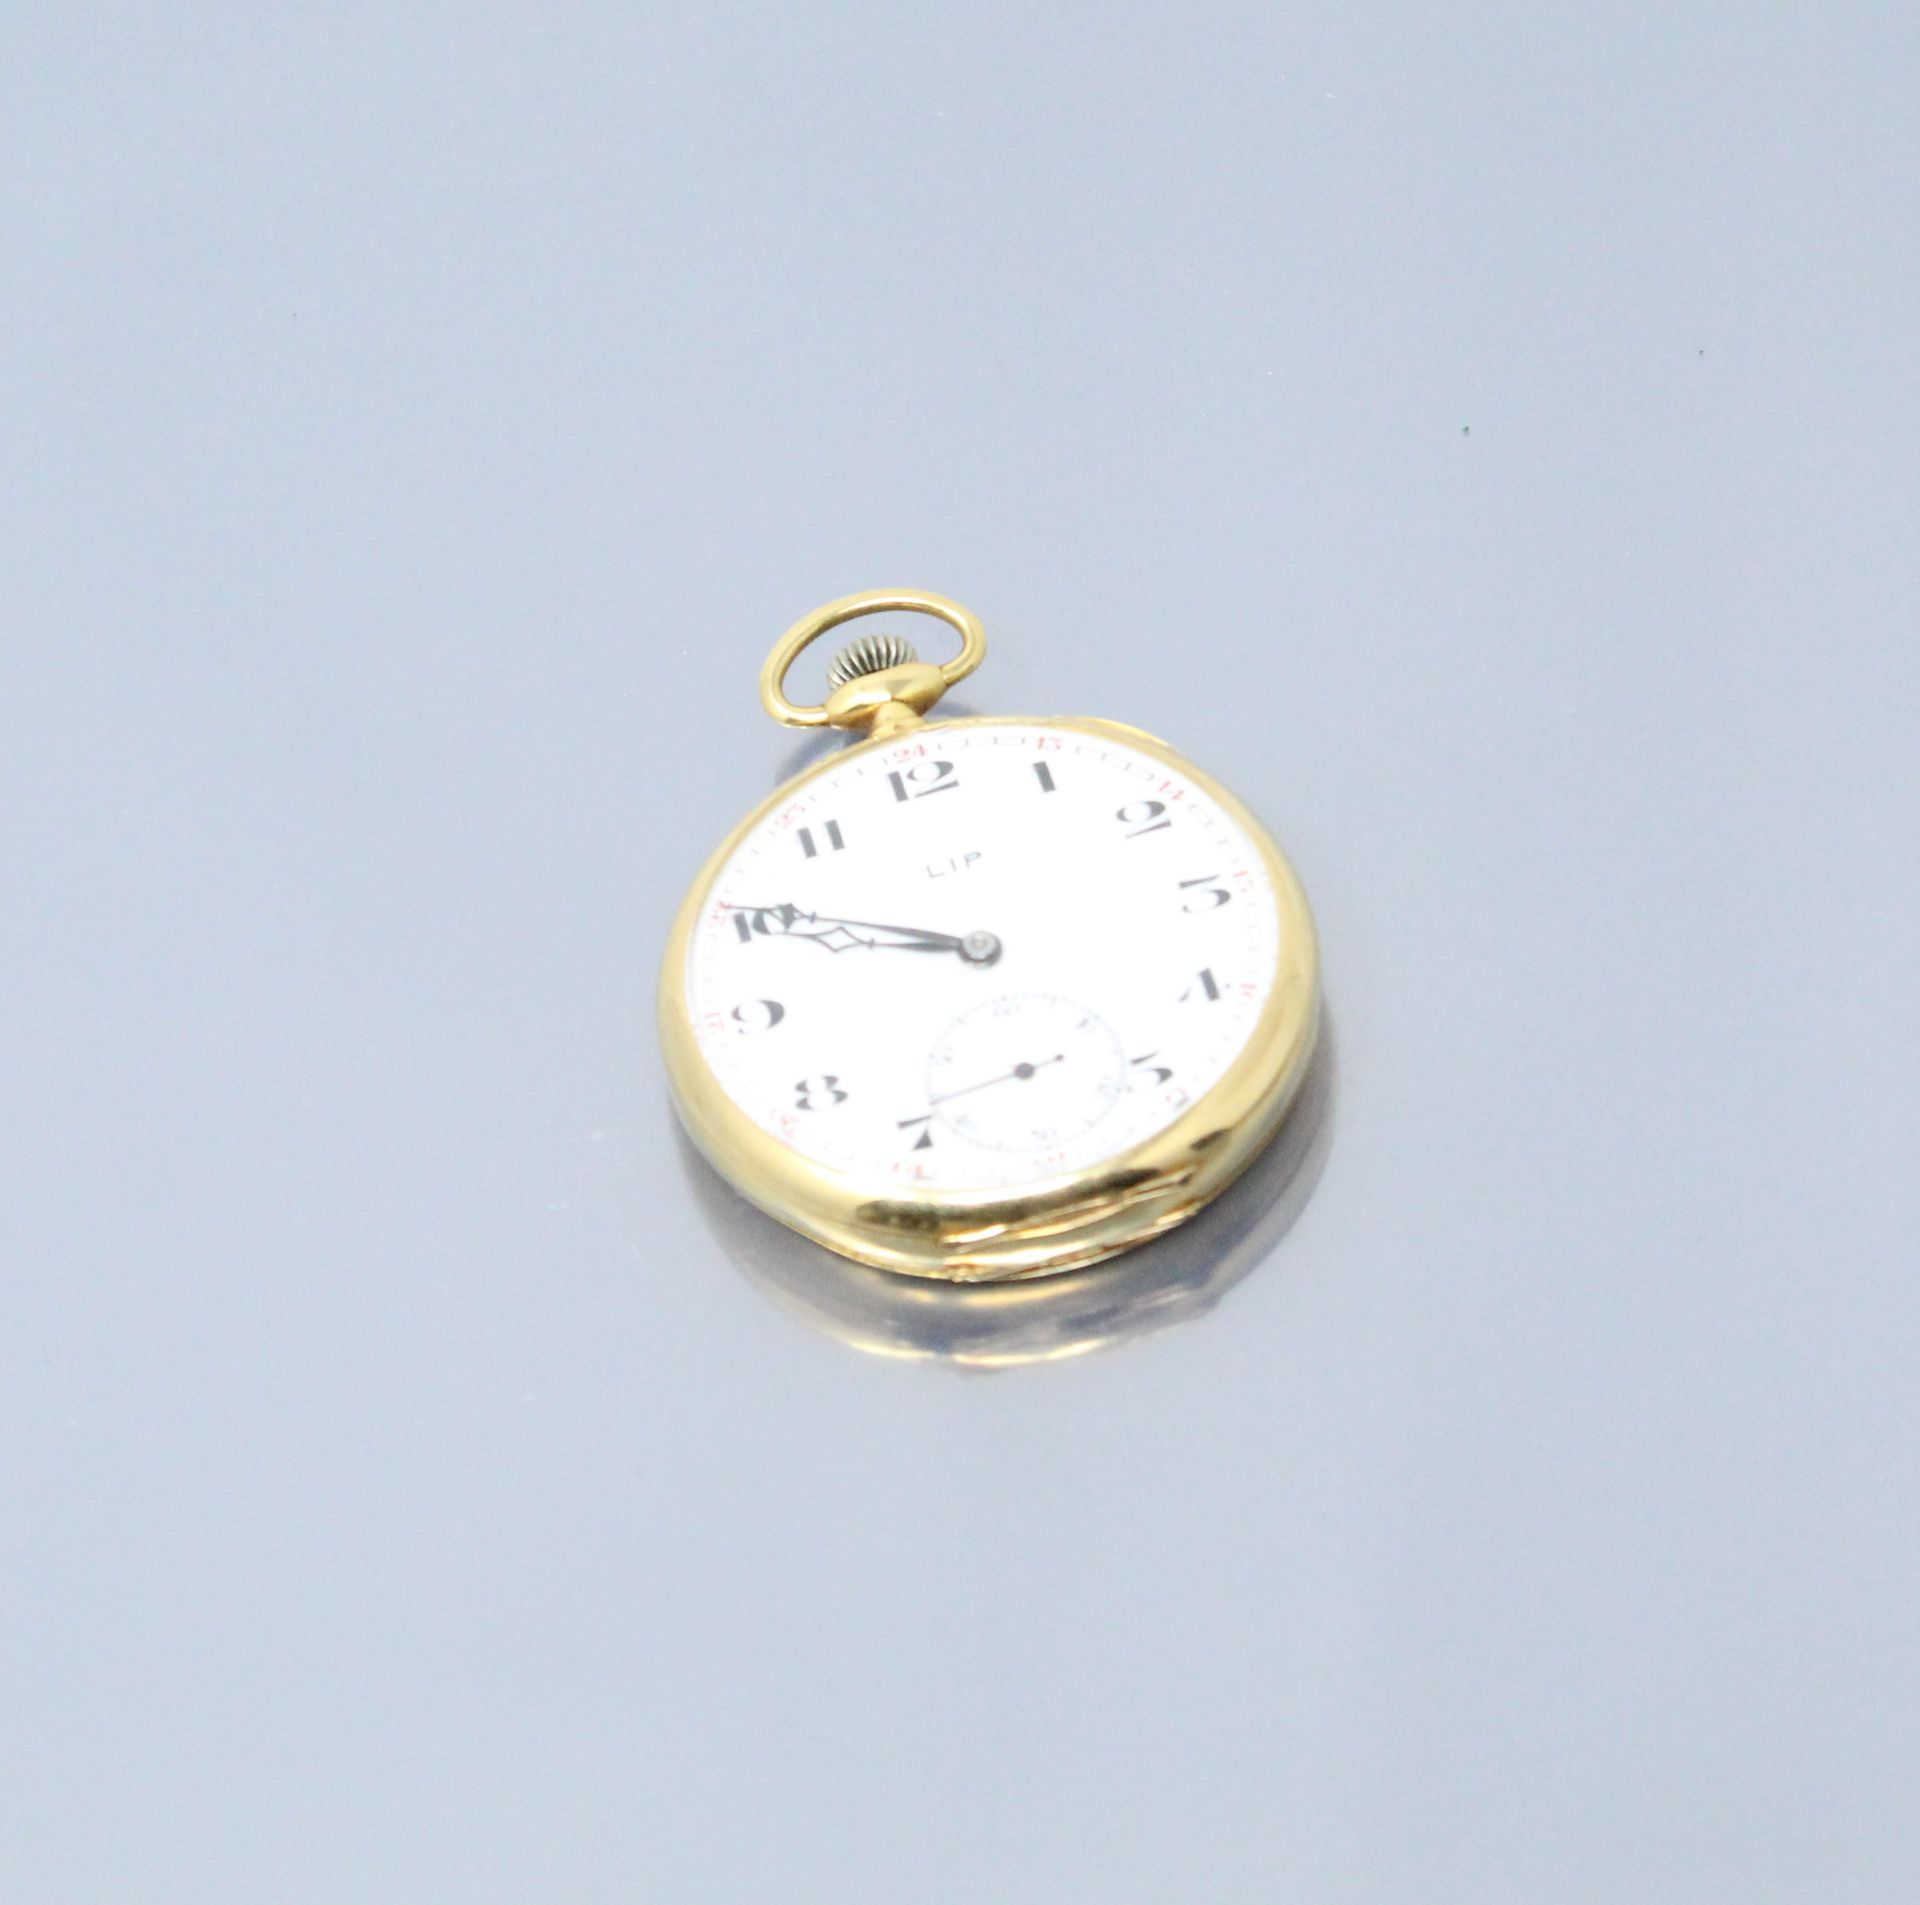 Null LIP

Pocket watch in 18K (750) yellow gold. Enamelled dial with white backg&hellip;